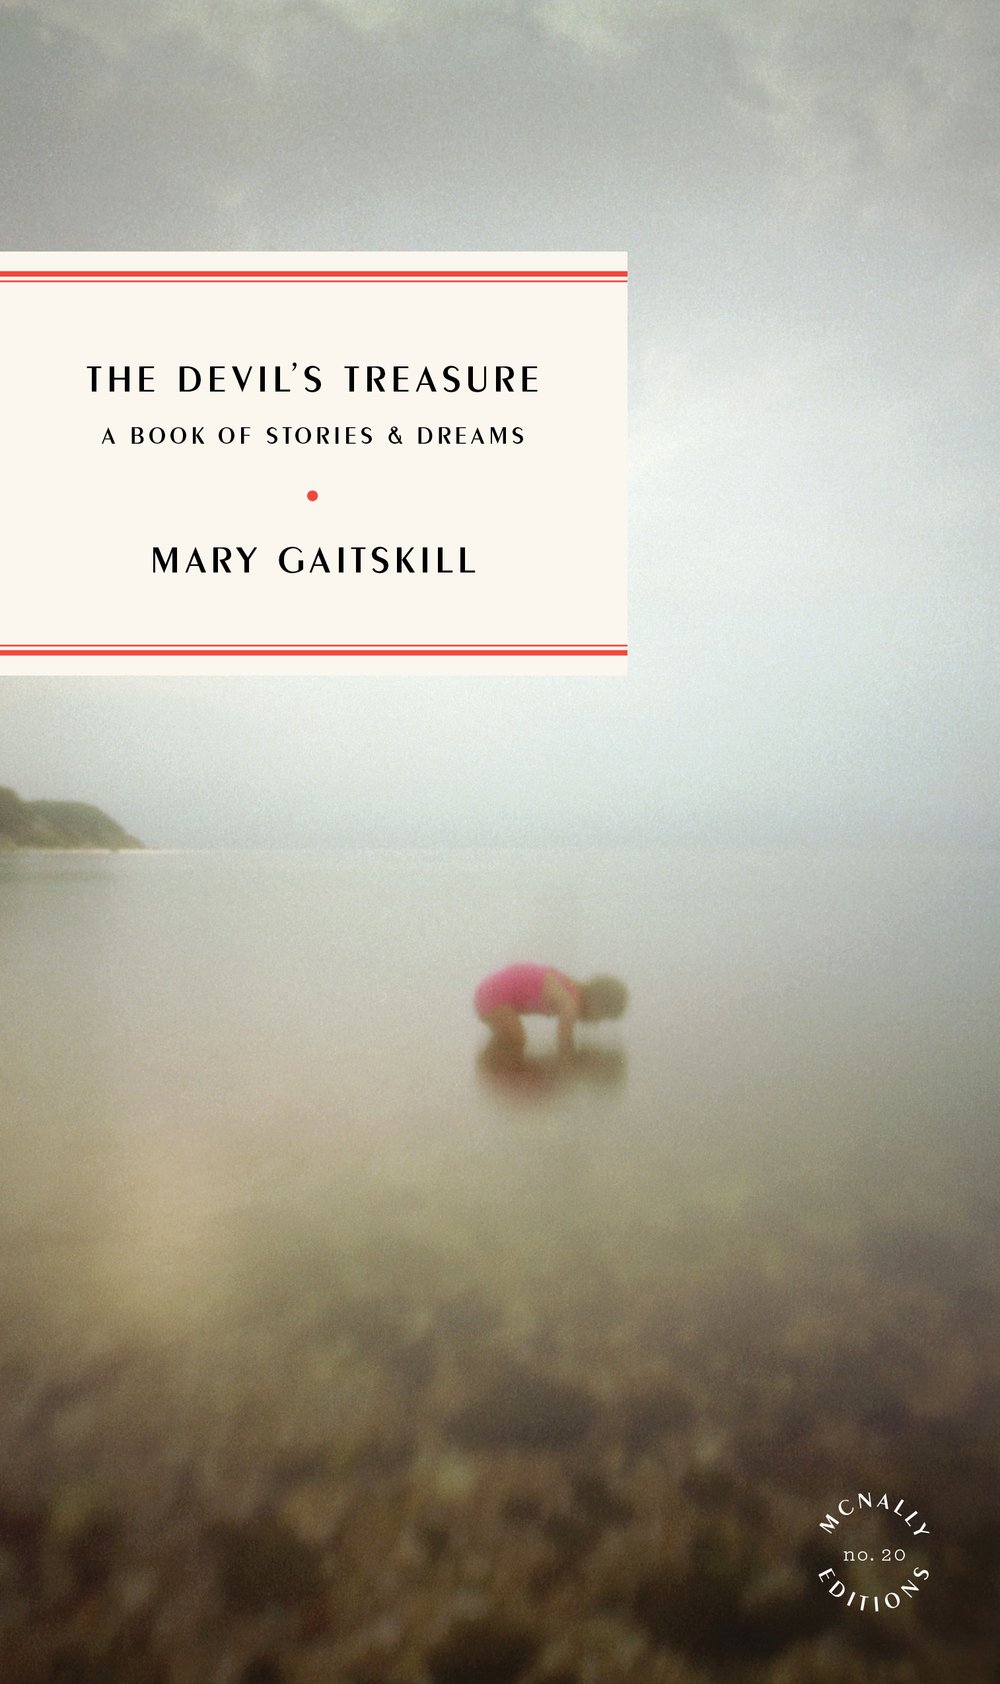 The Devil's Treasure: A Book of Stories and Dreams